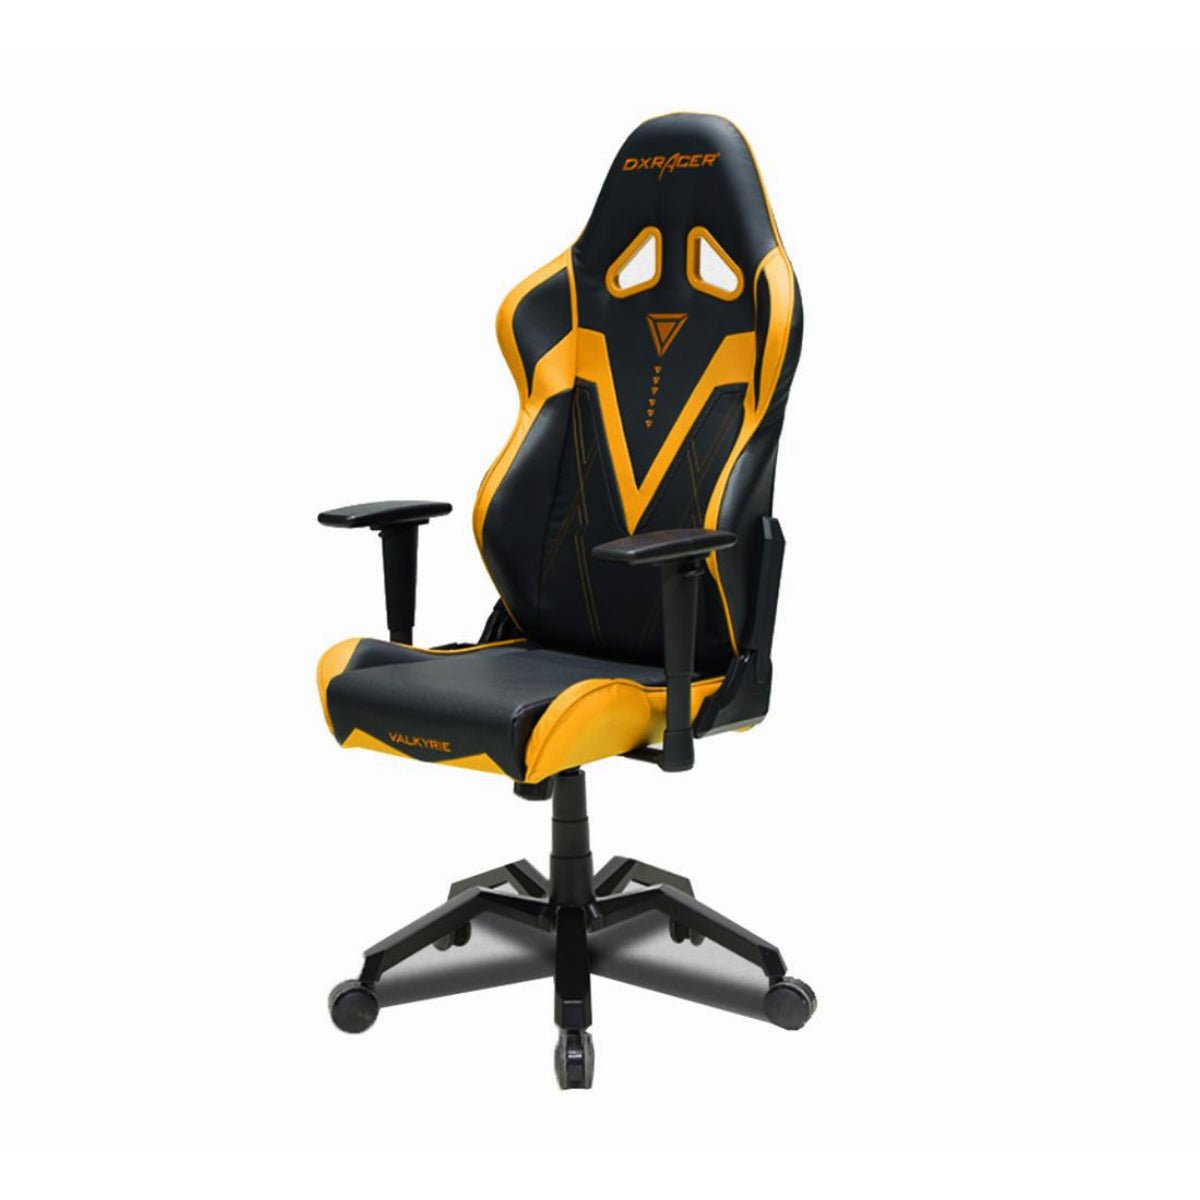 DXRacer Valkyrie Series Gaming Chair - Black/Yellow - Store 974 | ستور ٩٧٤